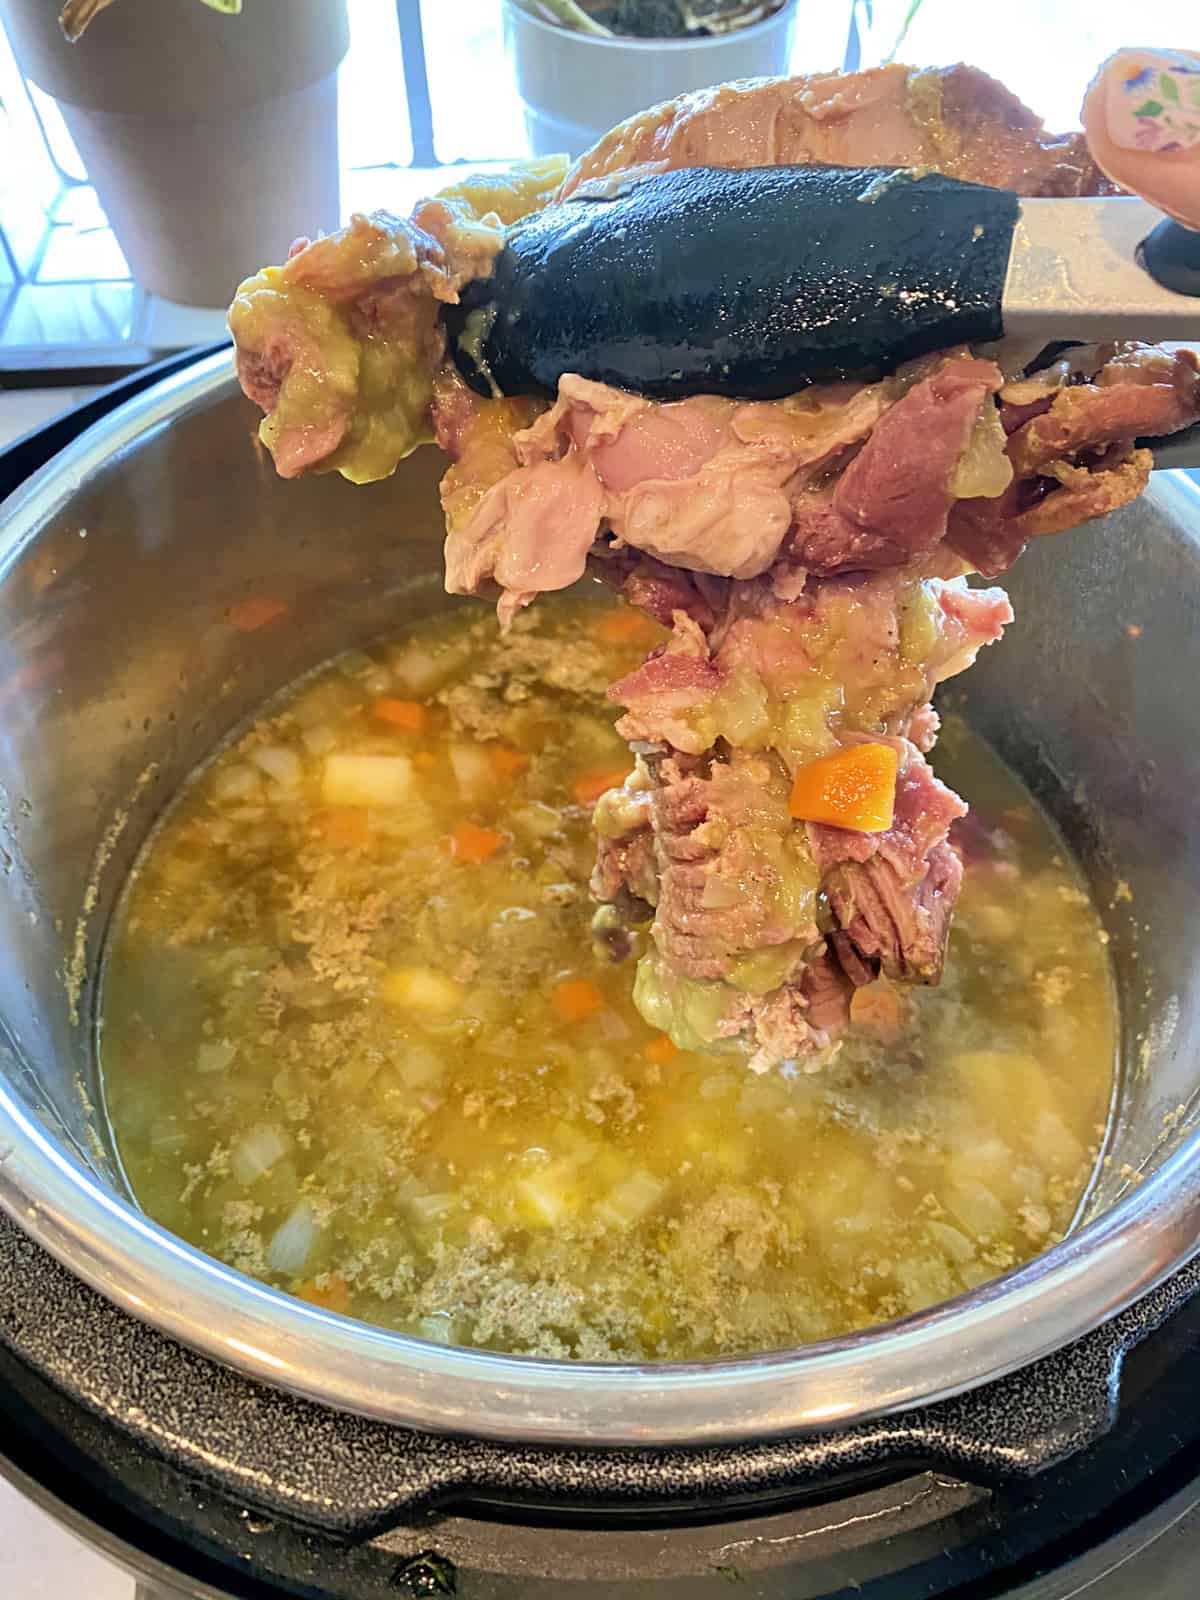 Black tongs holding a cooked ham bone over a pot of split pea soup in an Instant Pot.